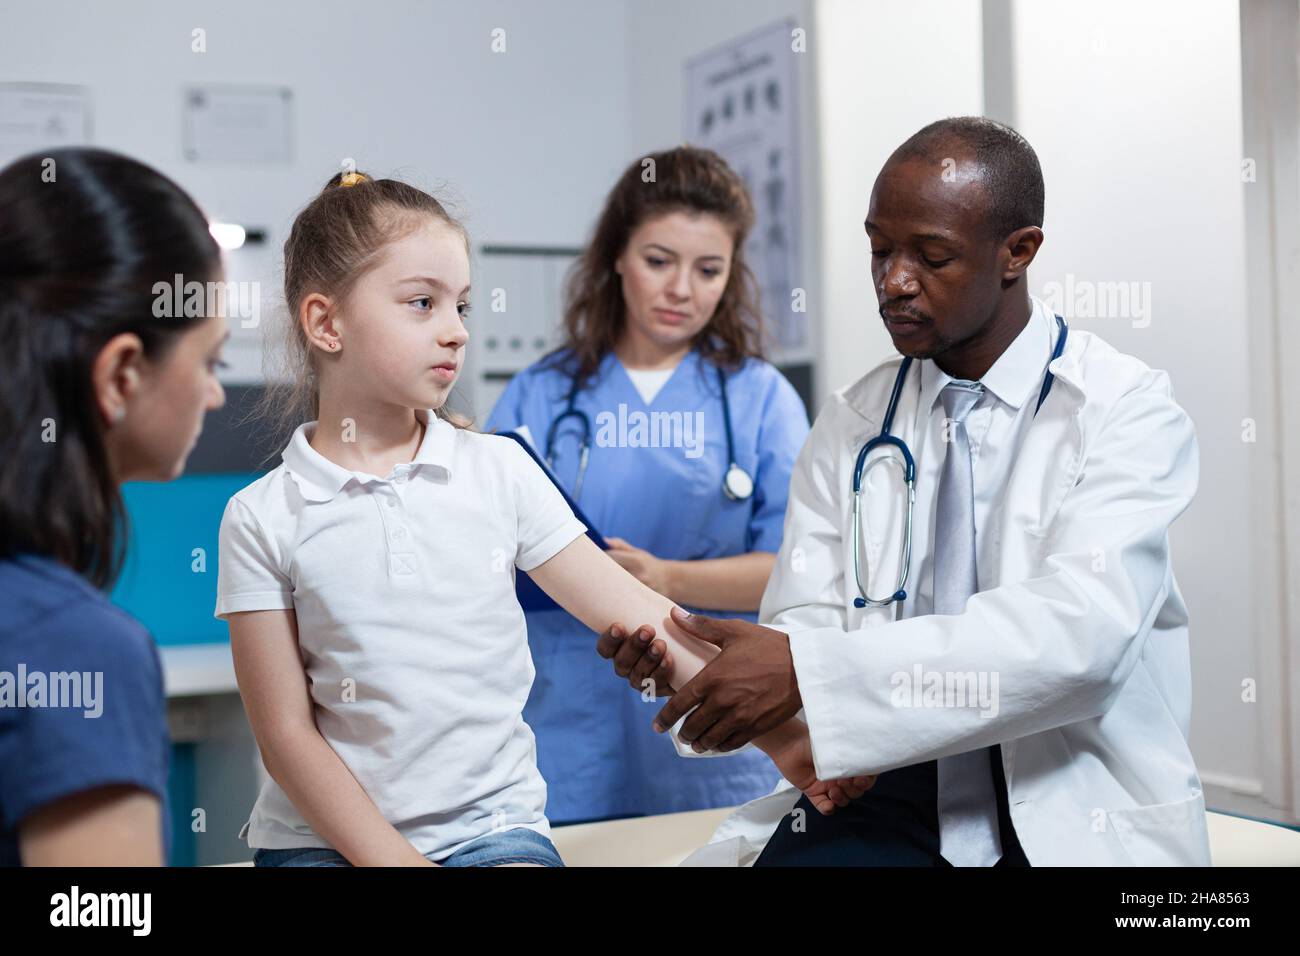 African american pediatrician doctor bandage fractured bone of girl patient during clinical physiotherapy in hospital office. Young child having broken arm after accident. Health care service Stock Photo